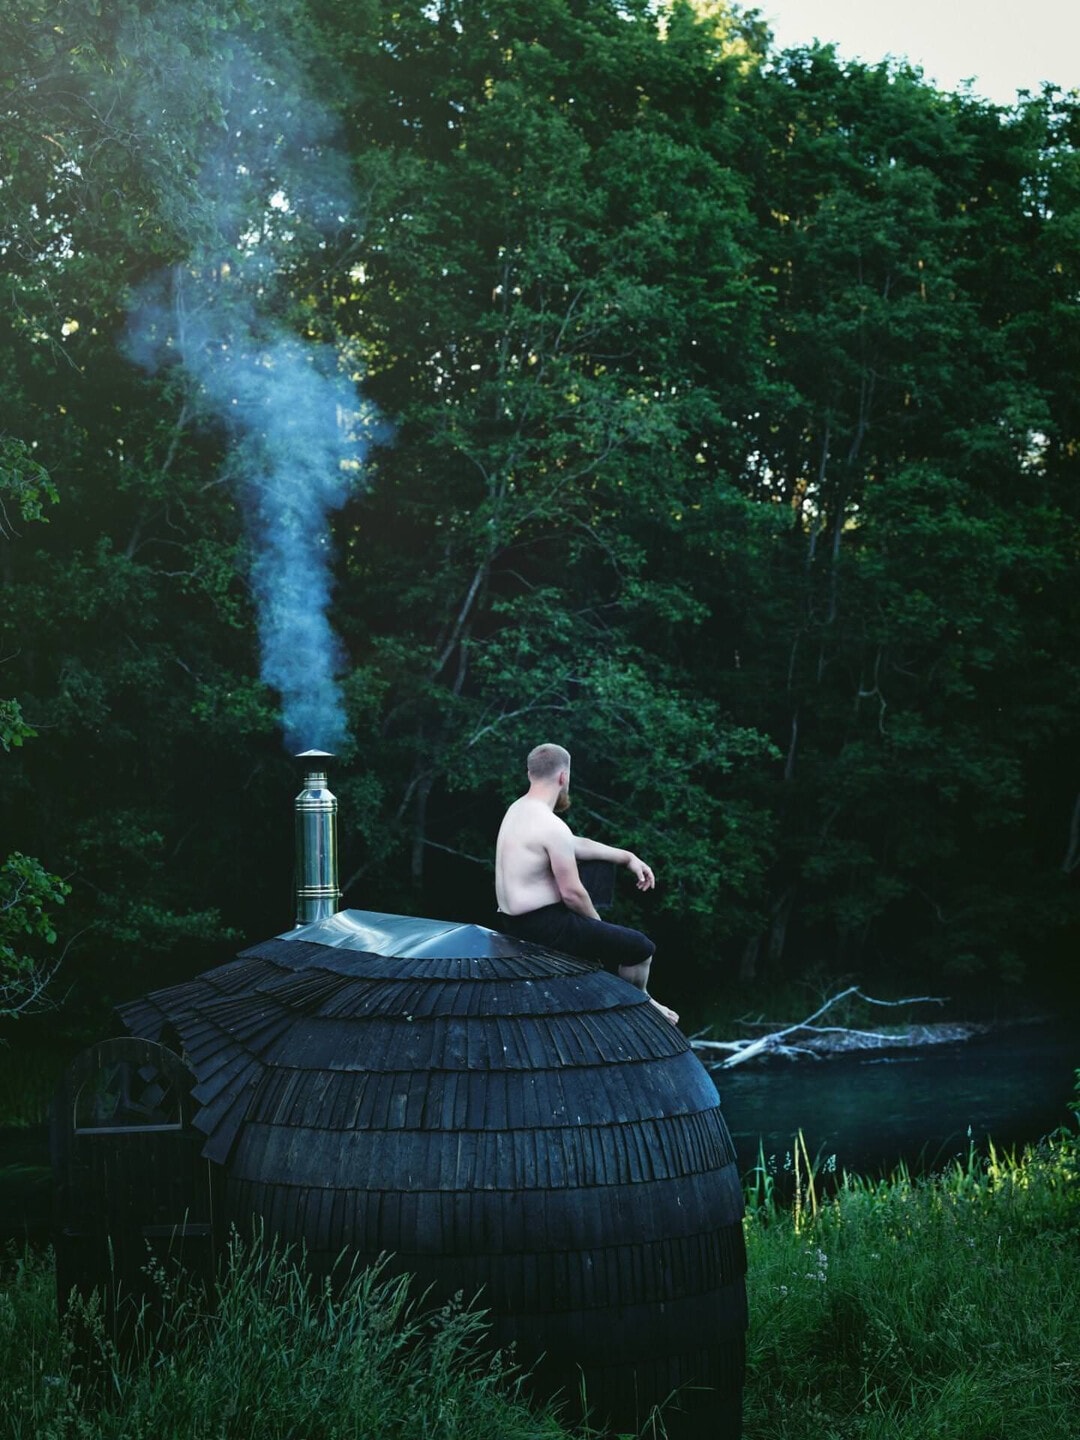 Man on top of a sauna relaxing